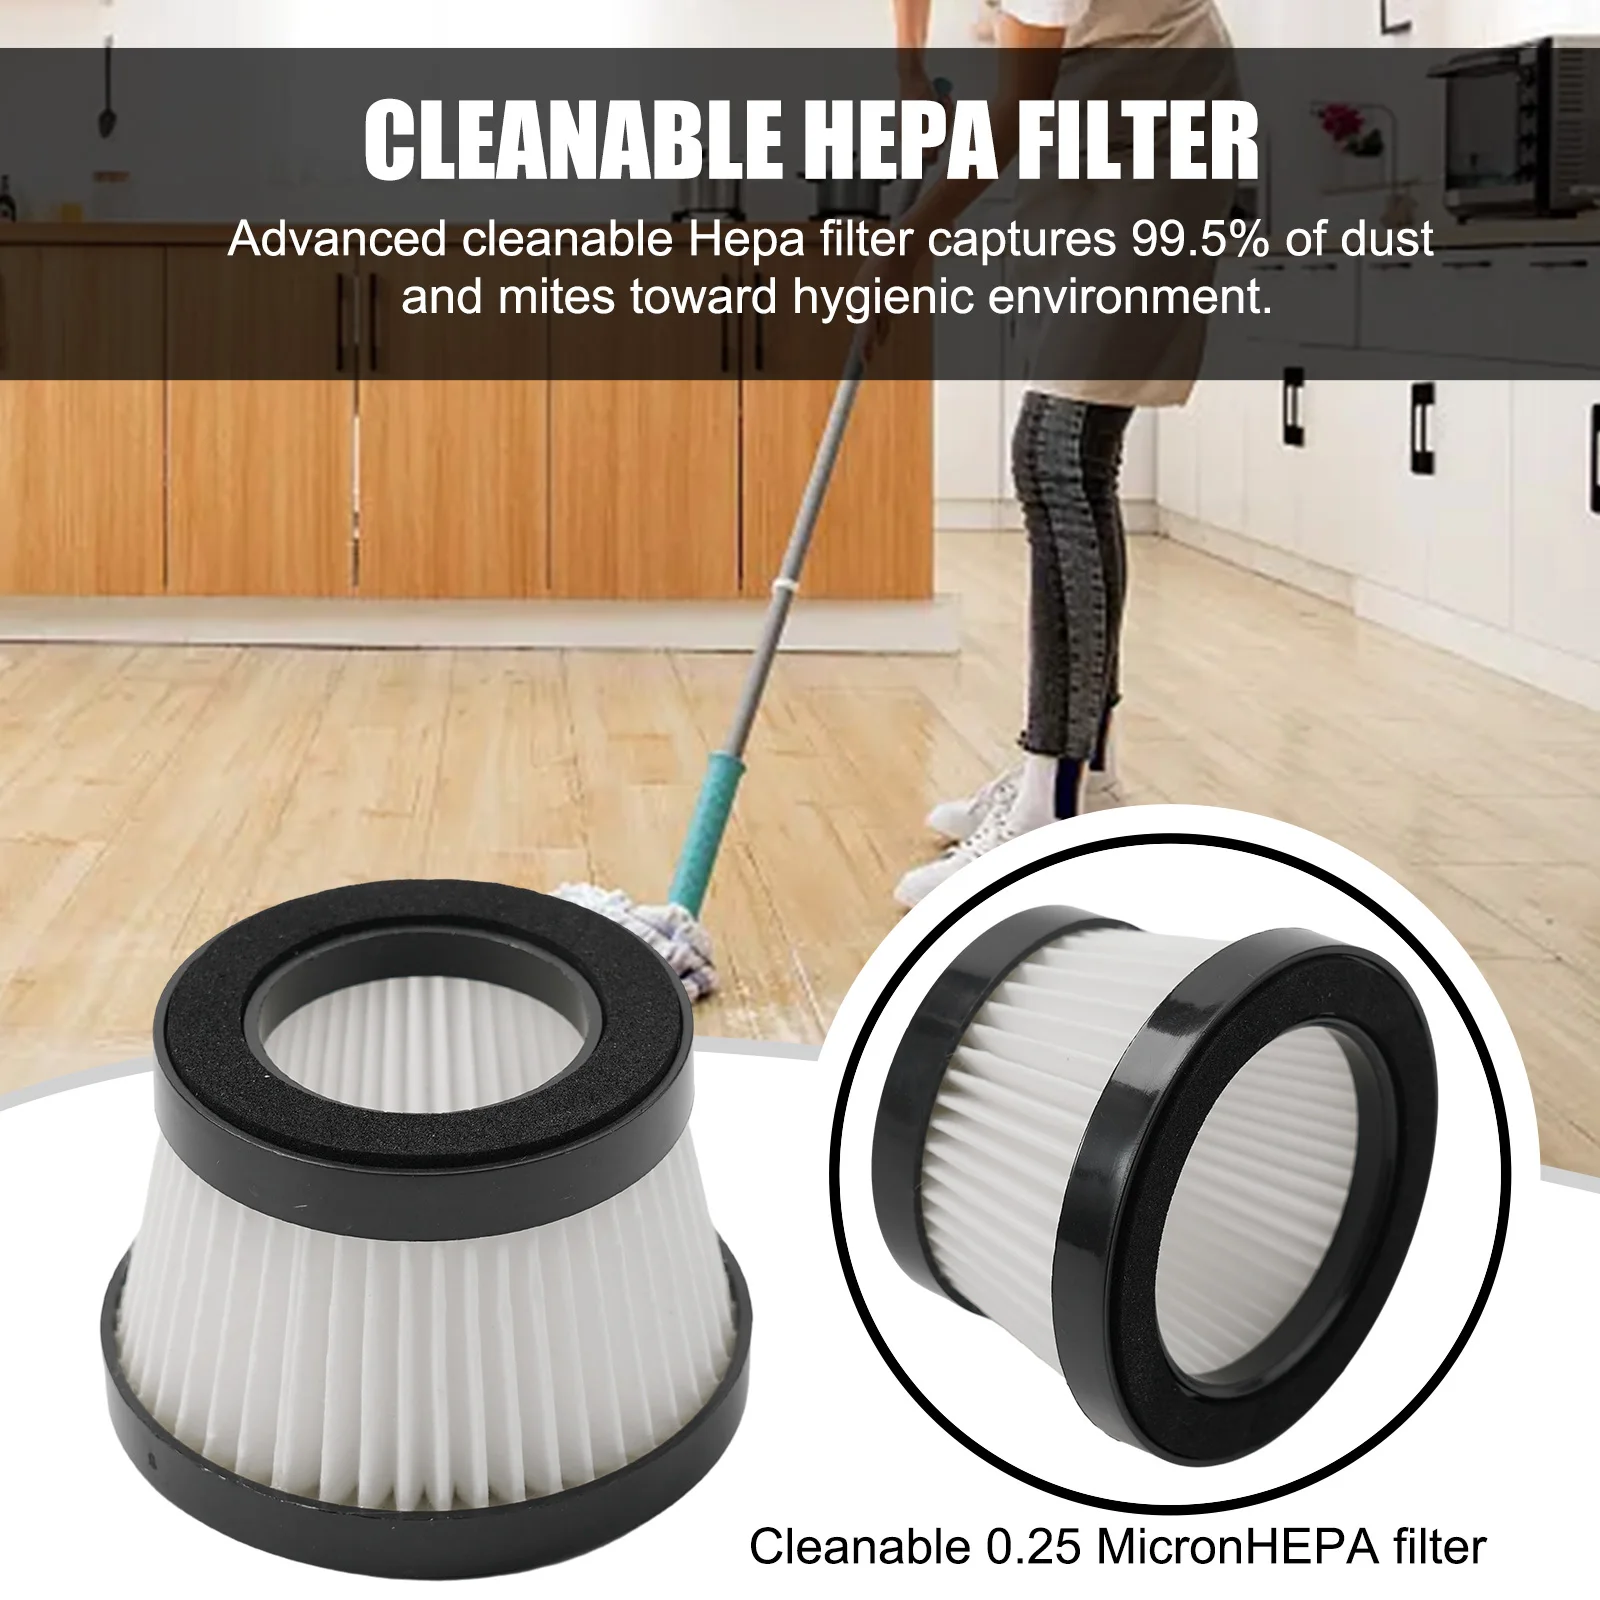 

High Quality Home HEPA Filter Vac Cleaner Filter Filtering Dust Lightweight Practical Recyclable White Durable